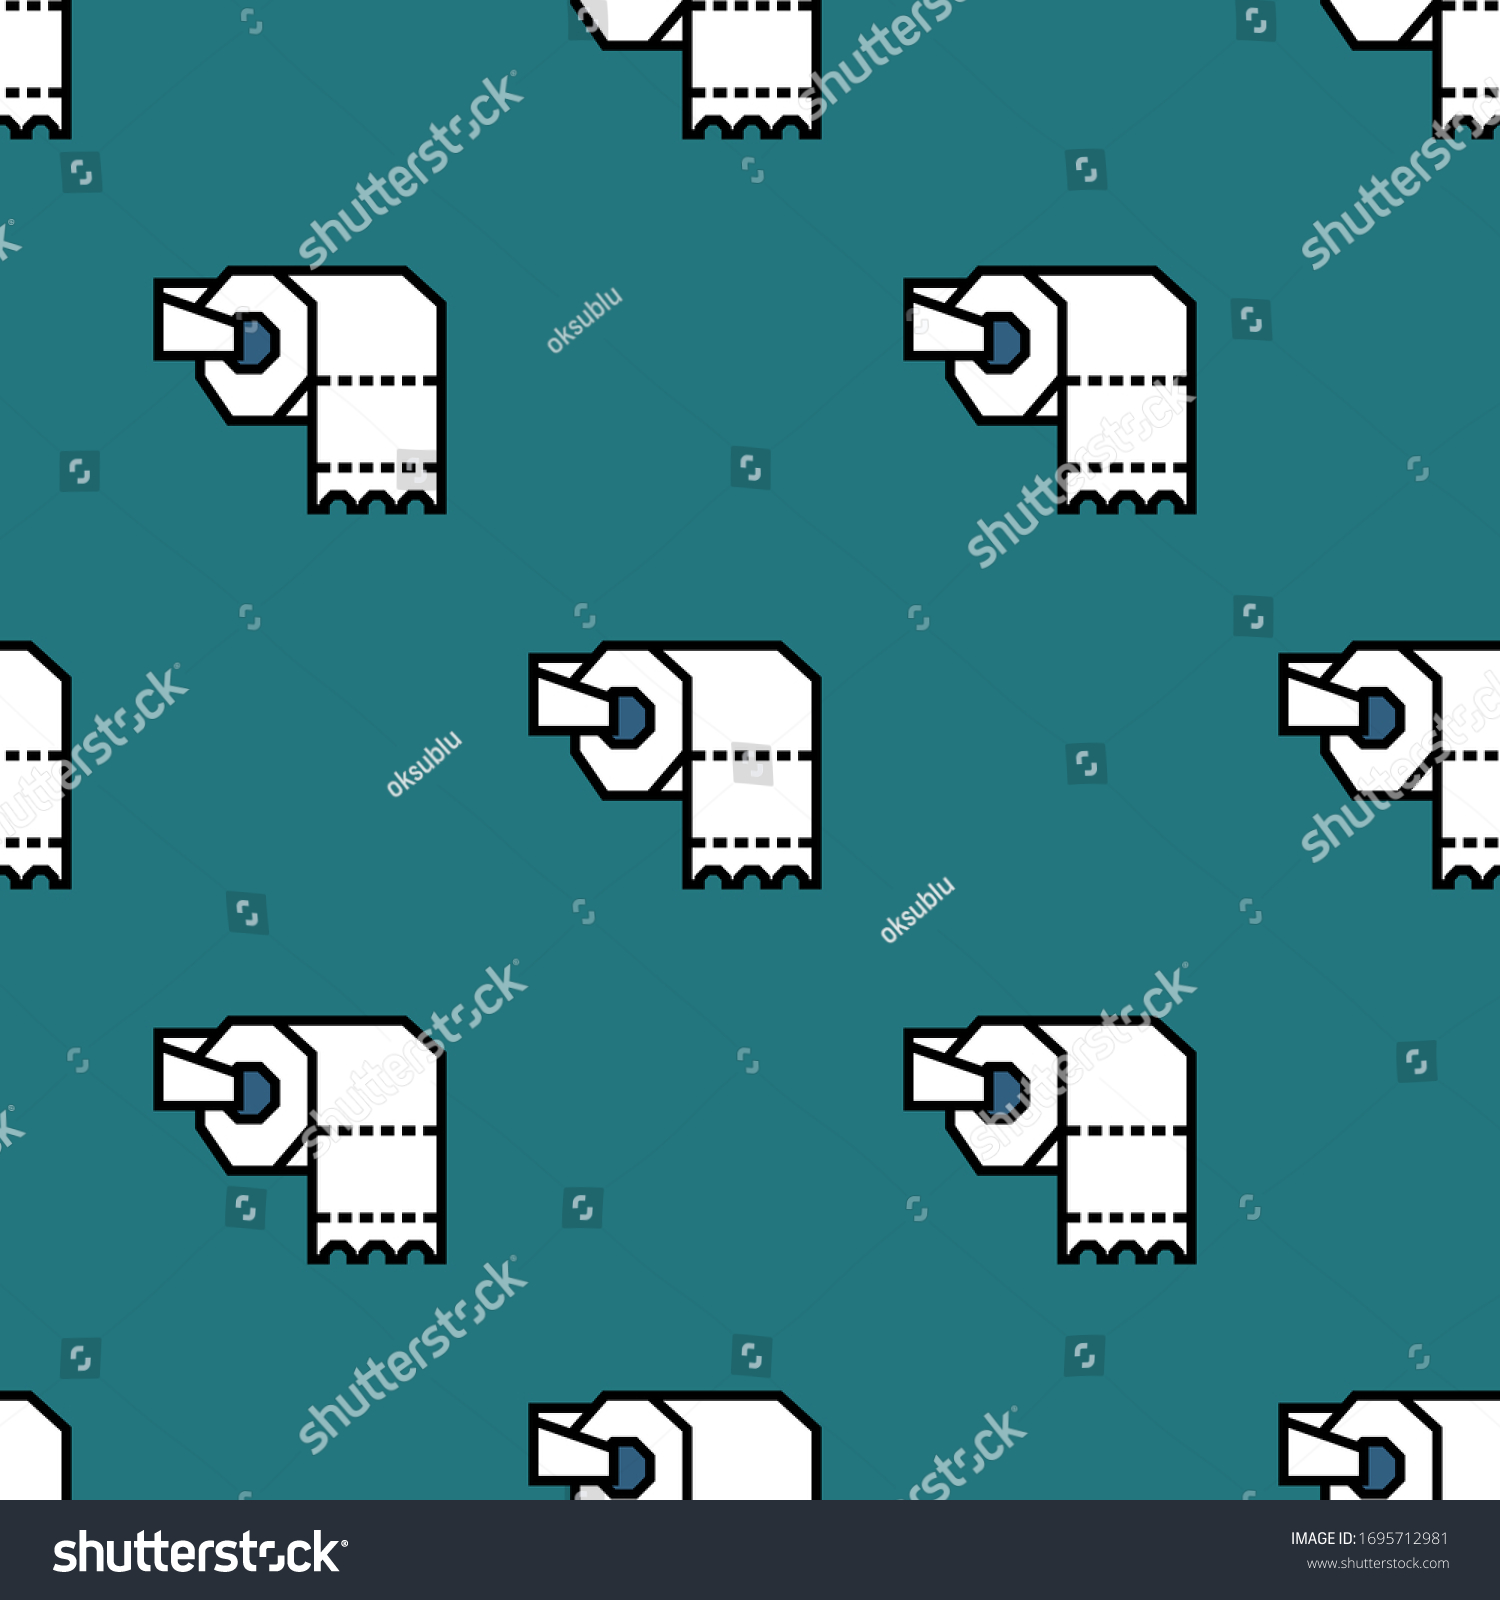 Toilet Paper Roll Seamless Pattern Angular Stock Vector Royalty Free 1695712981